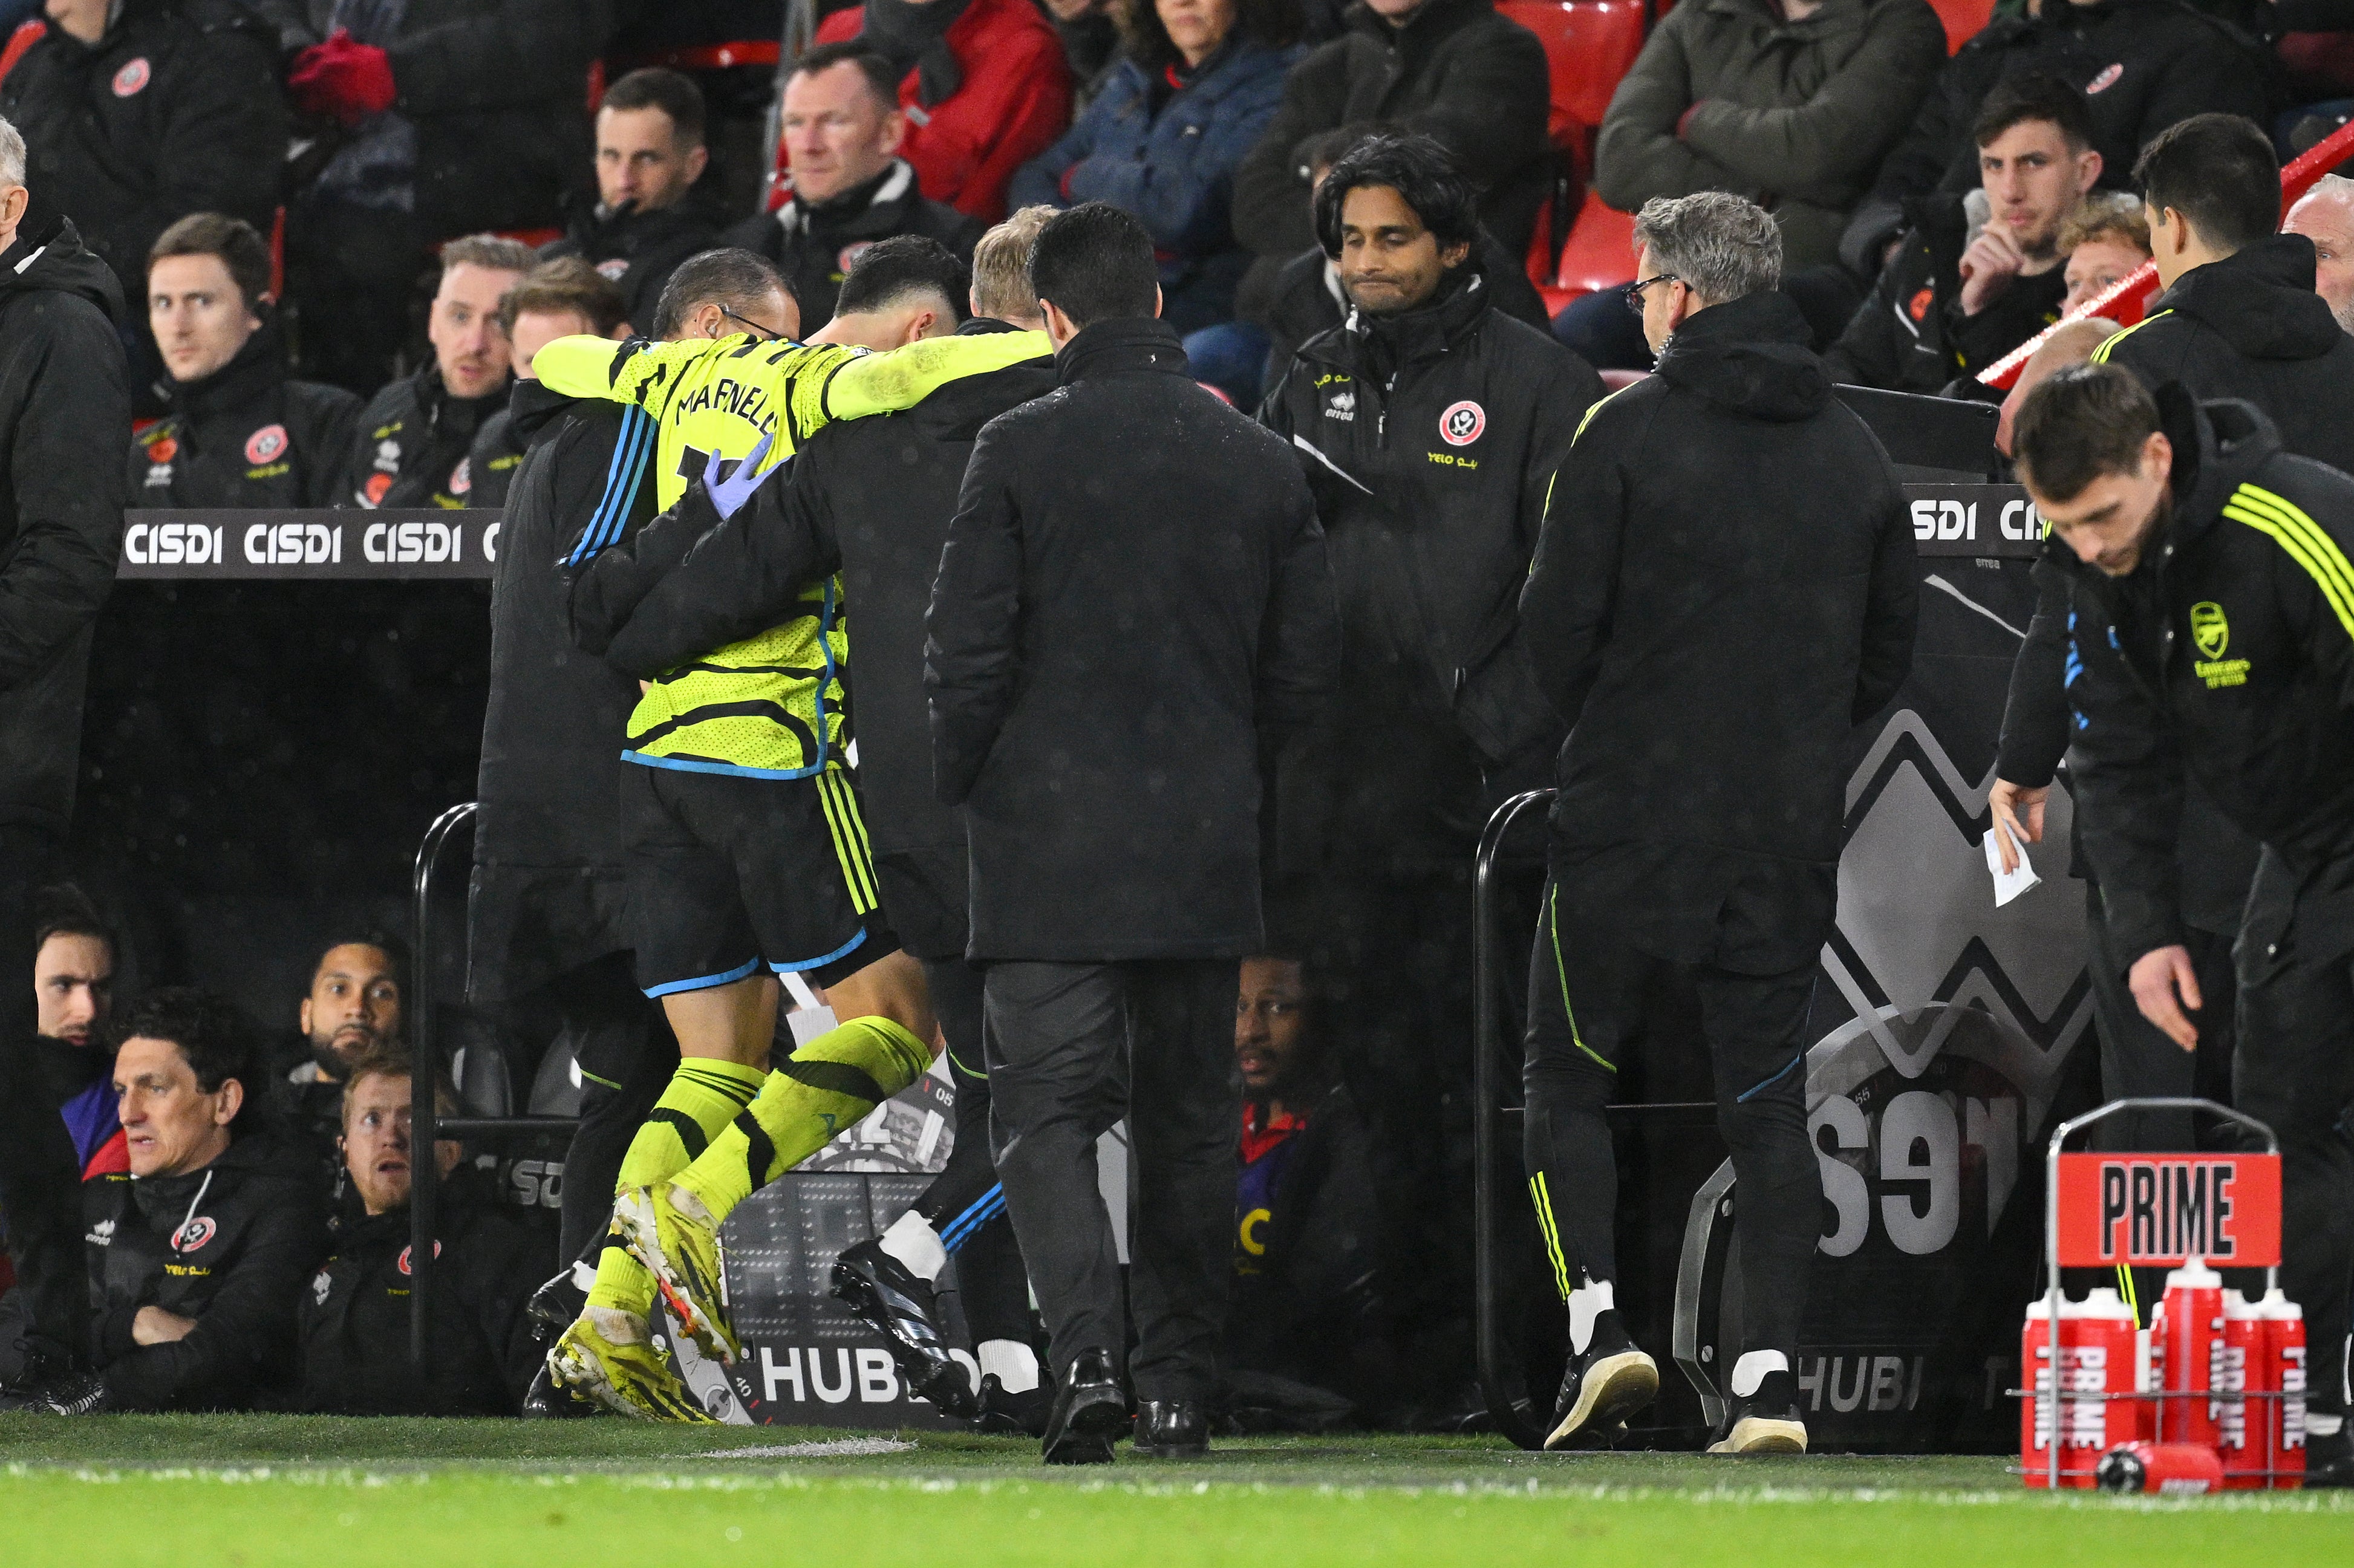 Martinelli hobbled off but has not suffered a serious injury, according to Arteta